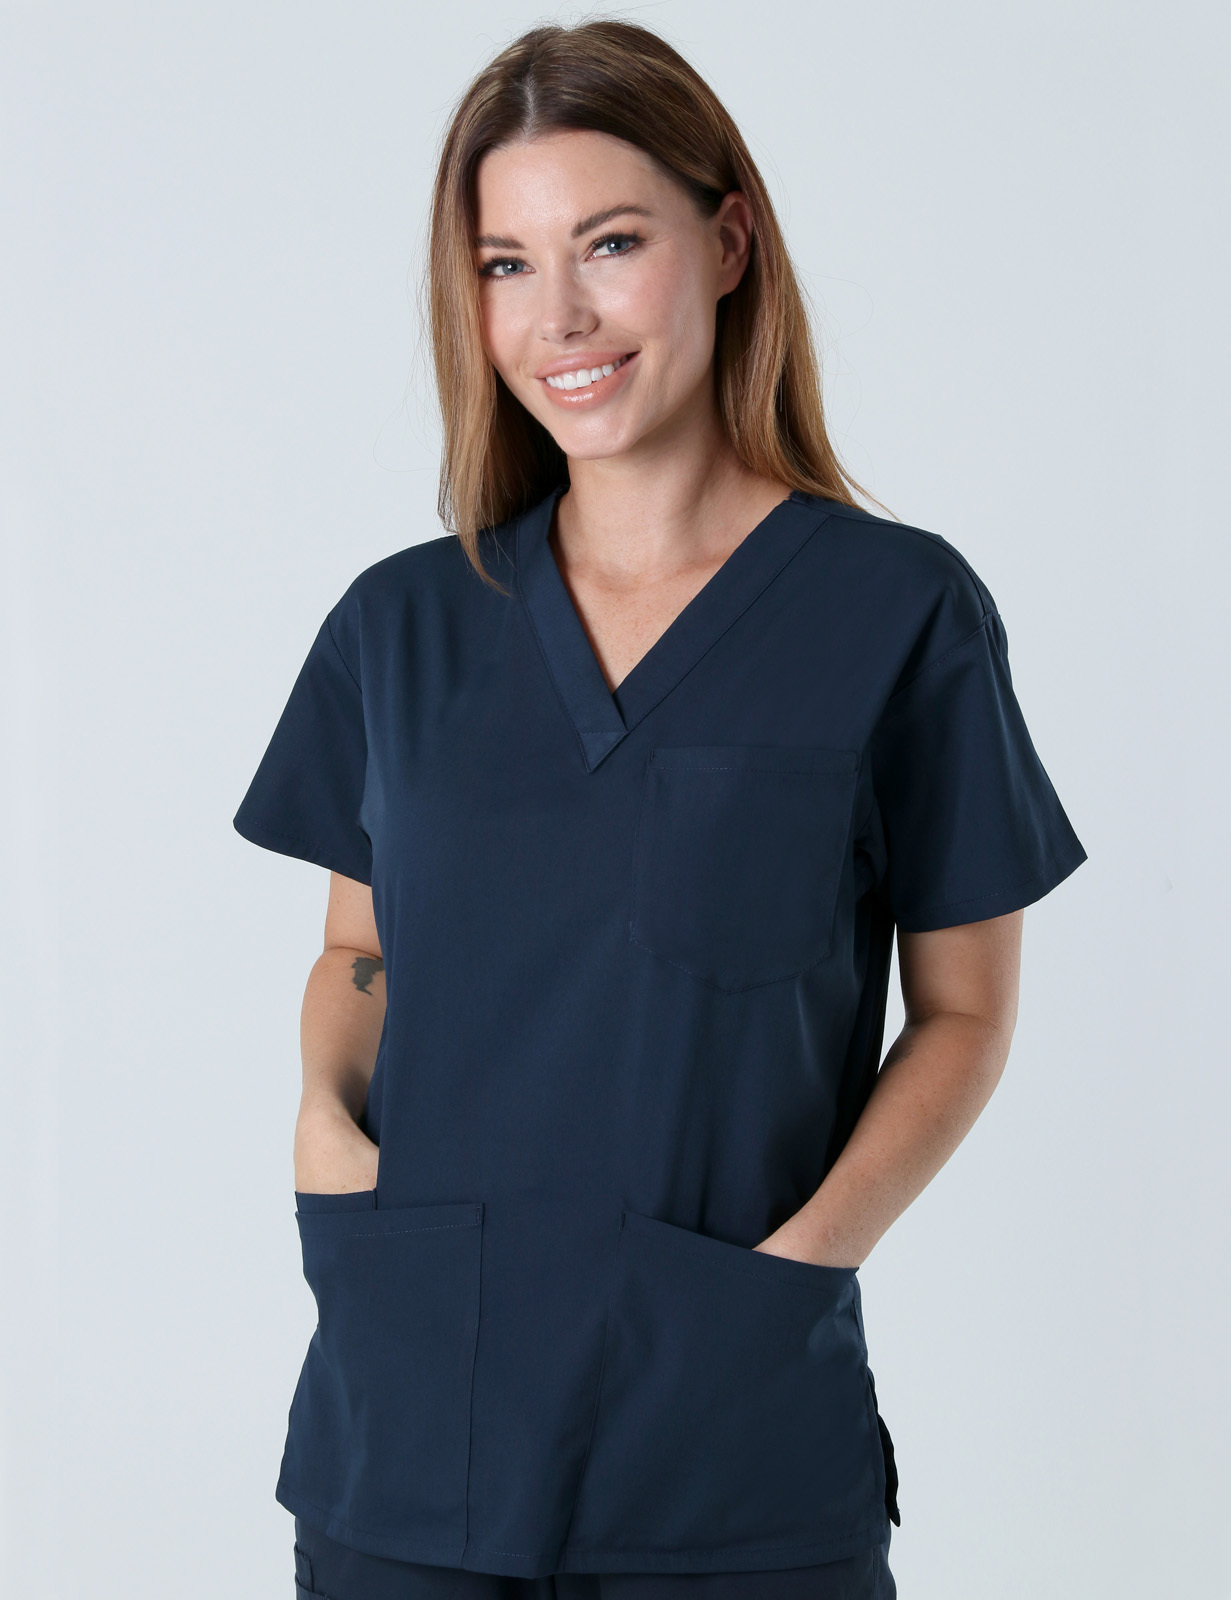 SCPU Hospital - Registered Nurse (4 Pocket Scrub Top and Cargo Pants in Navy incl Logos)